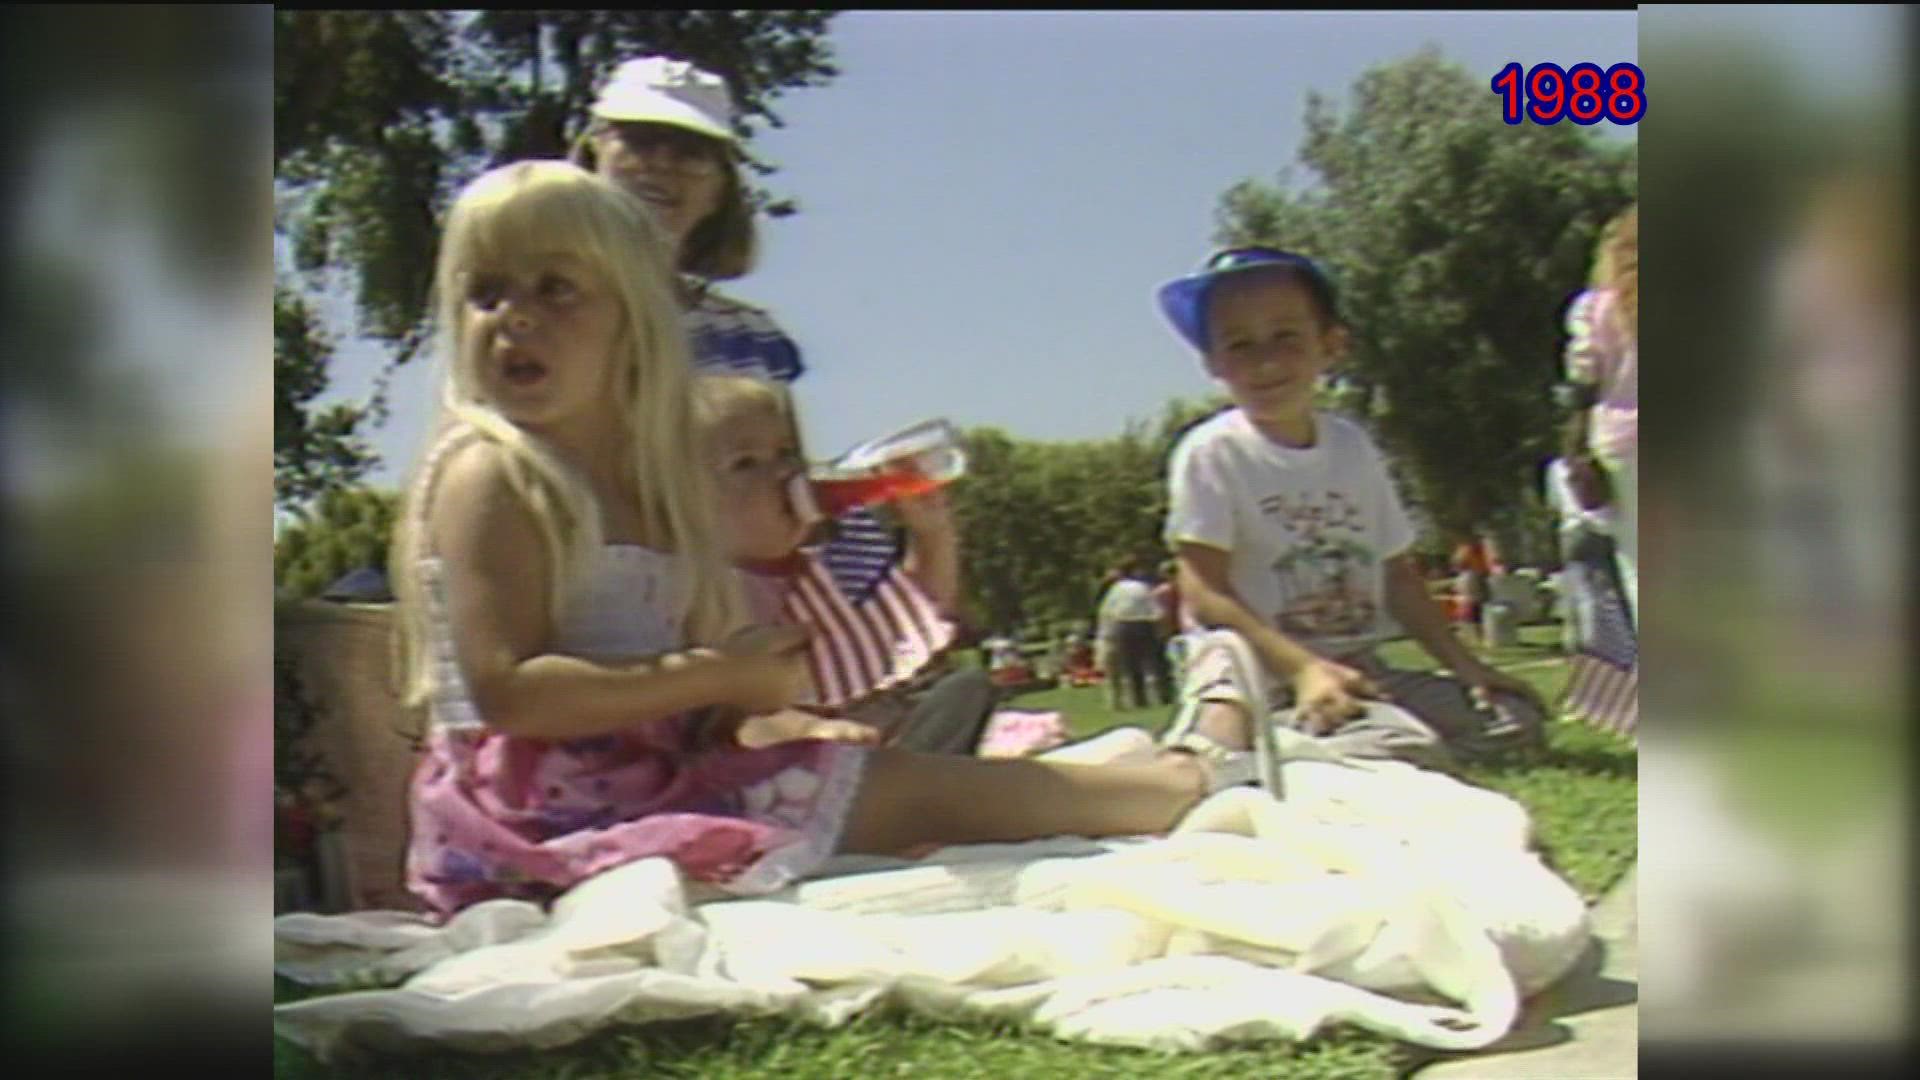 John Culea covers parades in '86, Doug McAllister reports on beach crowds in '88 and Larry Himmel emcees the patriotic pets contest in Rancho Bernardo in 2011.